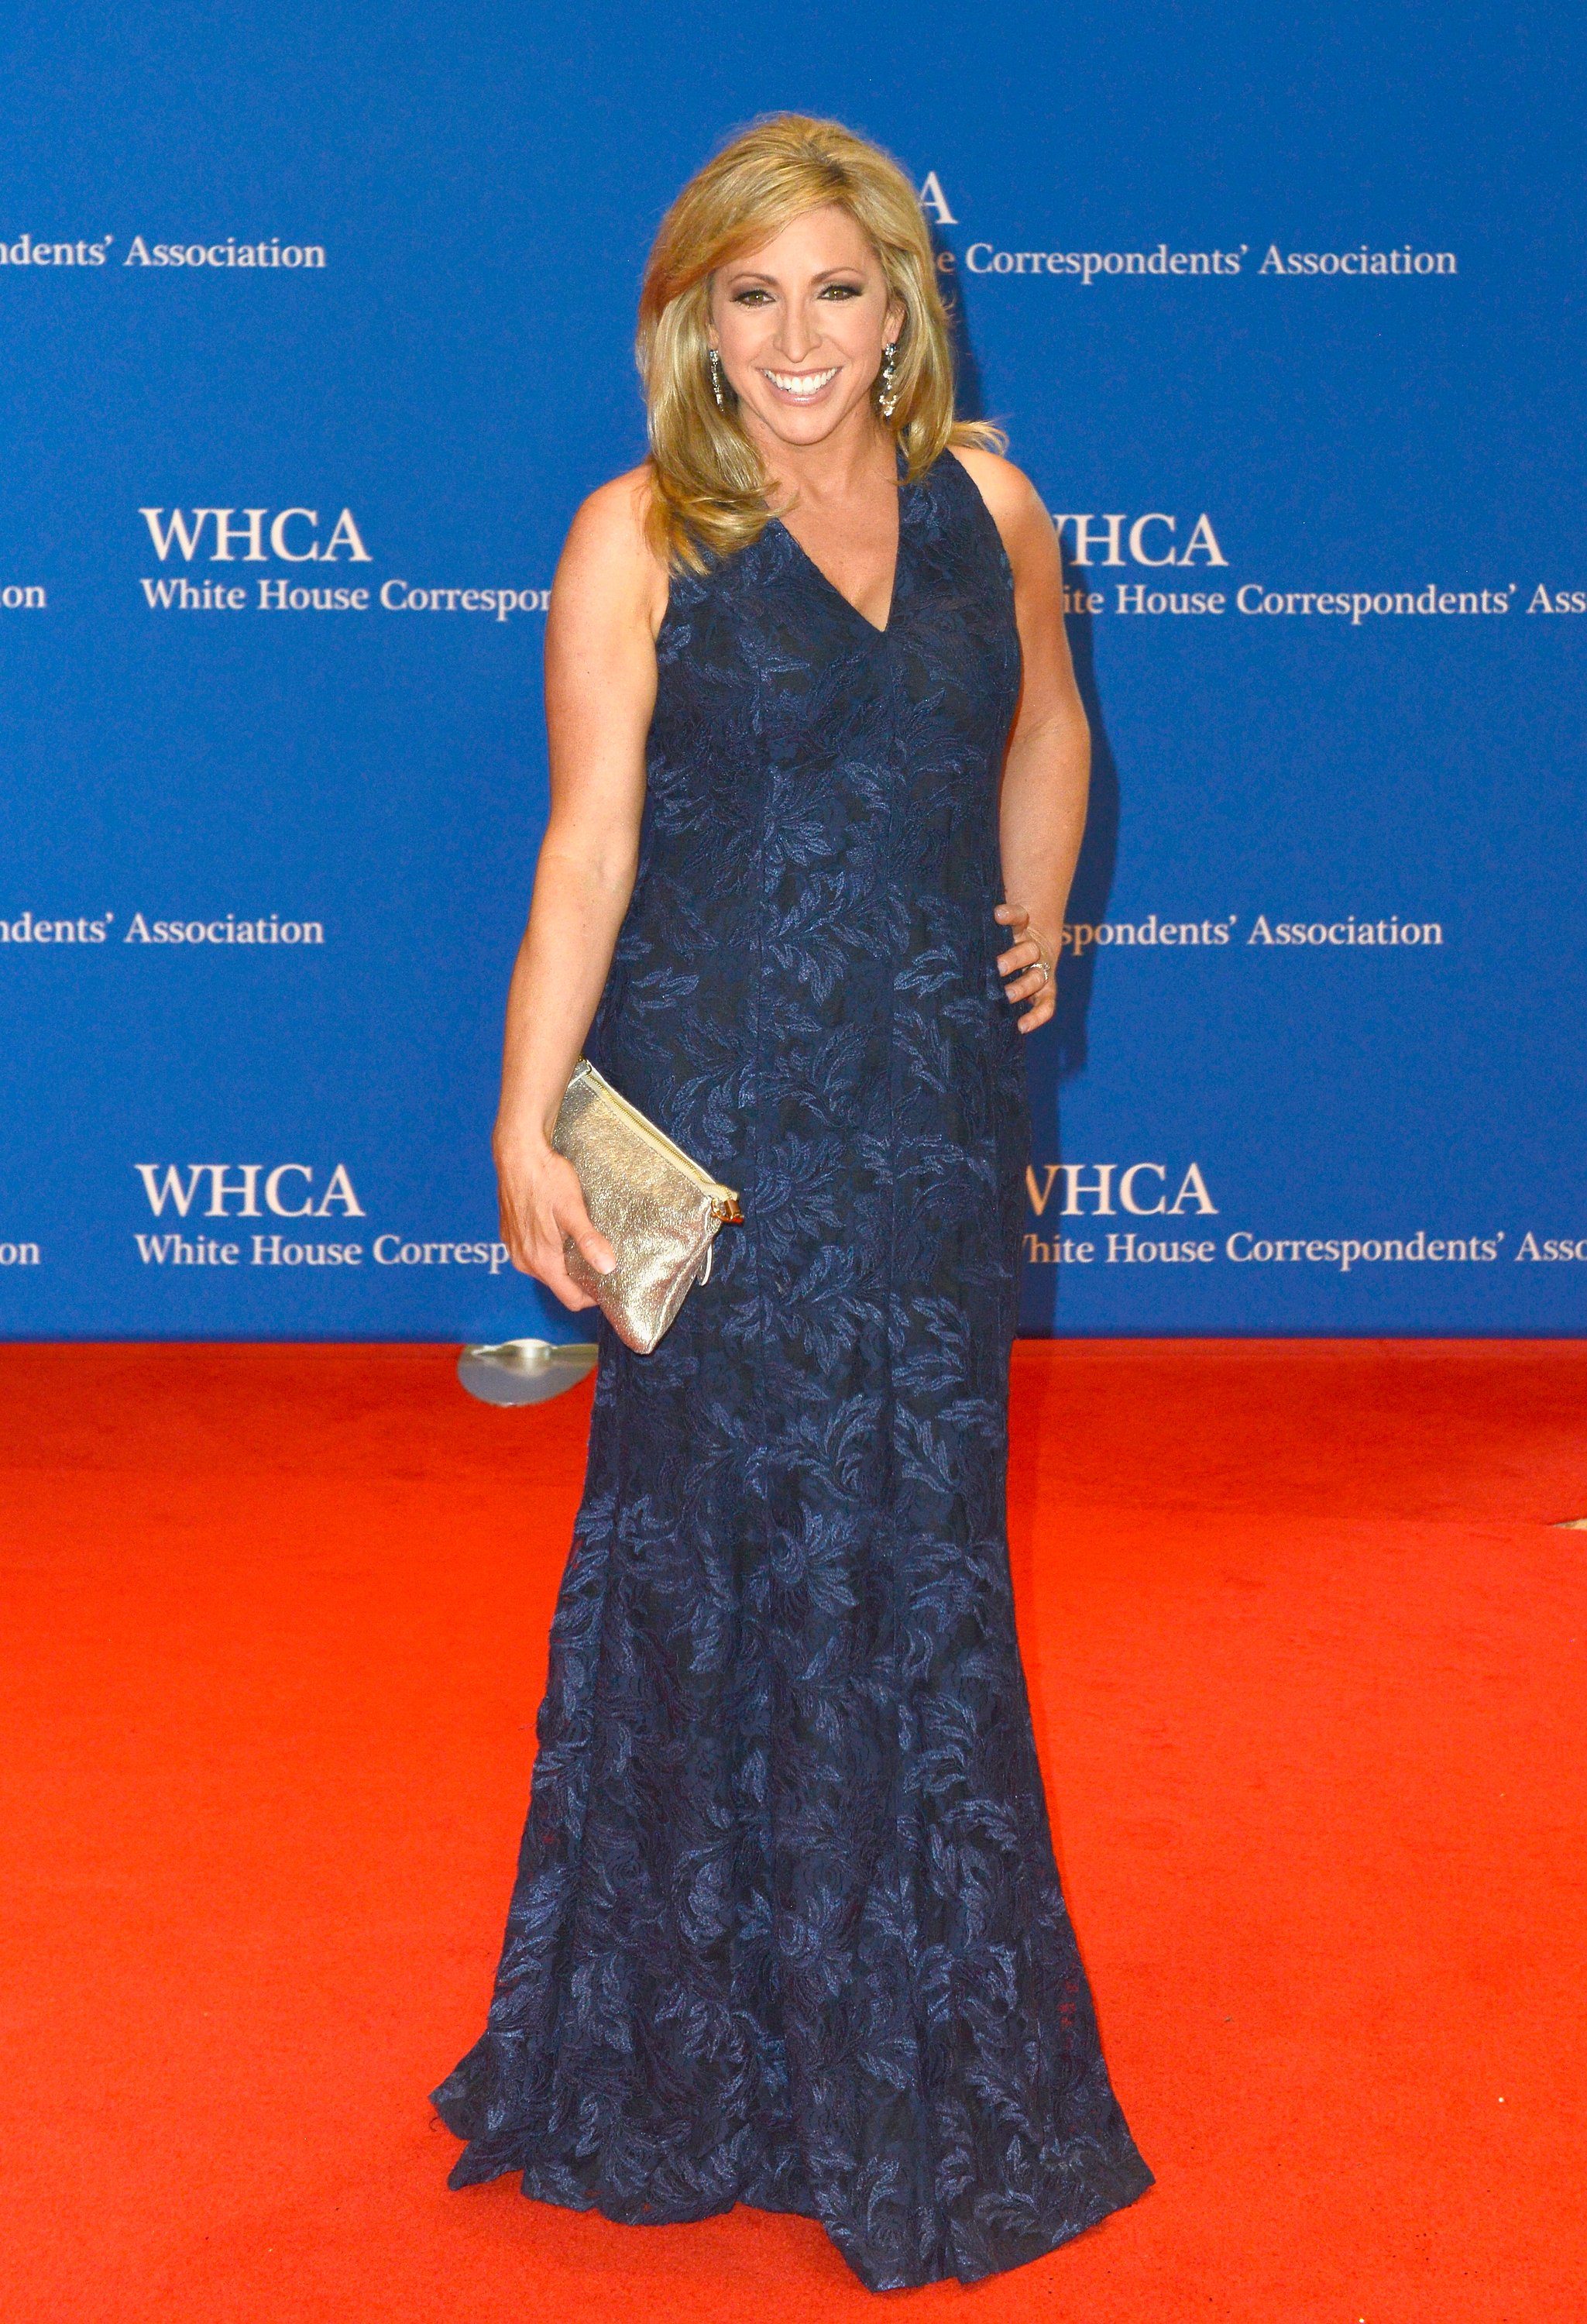 Laura Ingraham at the 2017 White House Correspondents' Association Dinner on April 29, 2017, in Washington, DC. | Source: Getty Images